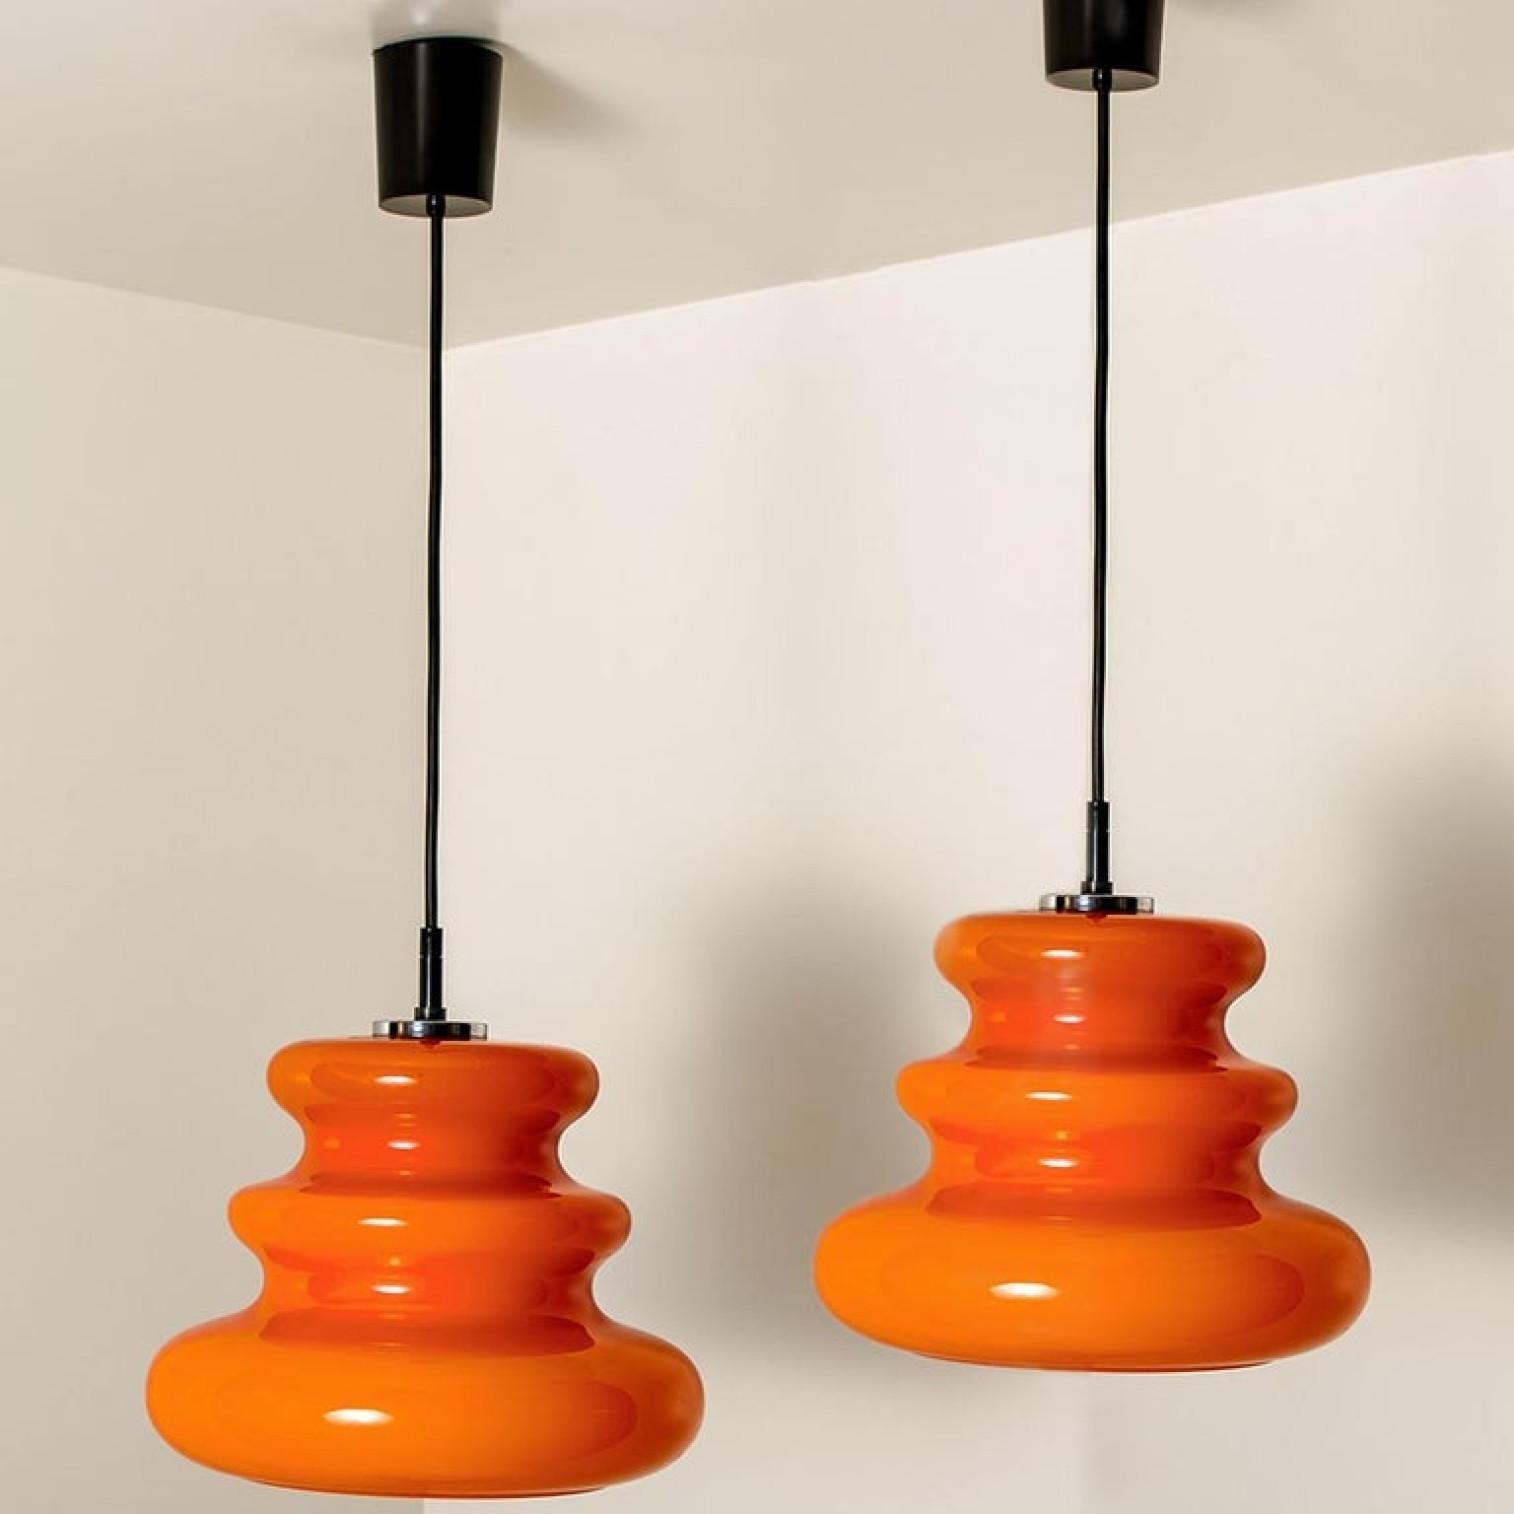 One of the Two Orange Peill & Putzler Pendant Lights, 1970s For Sale 1